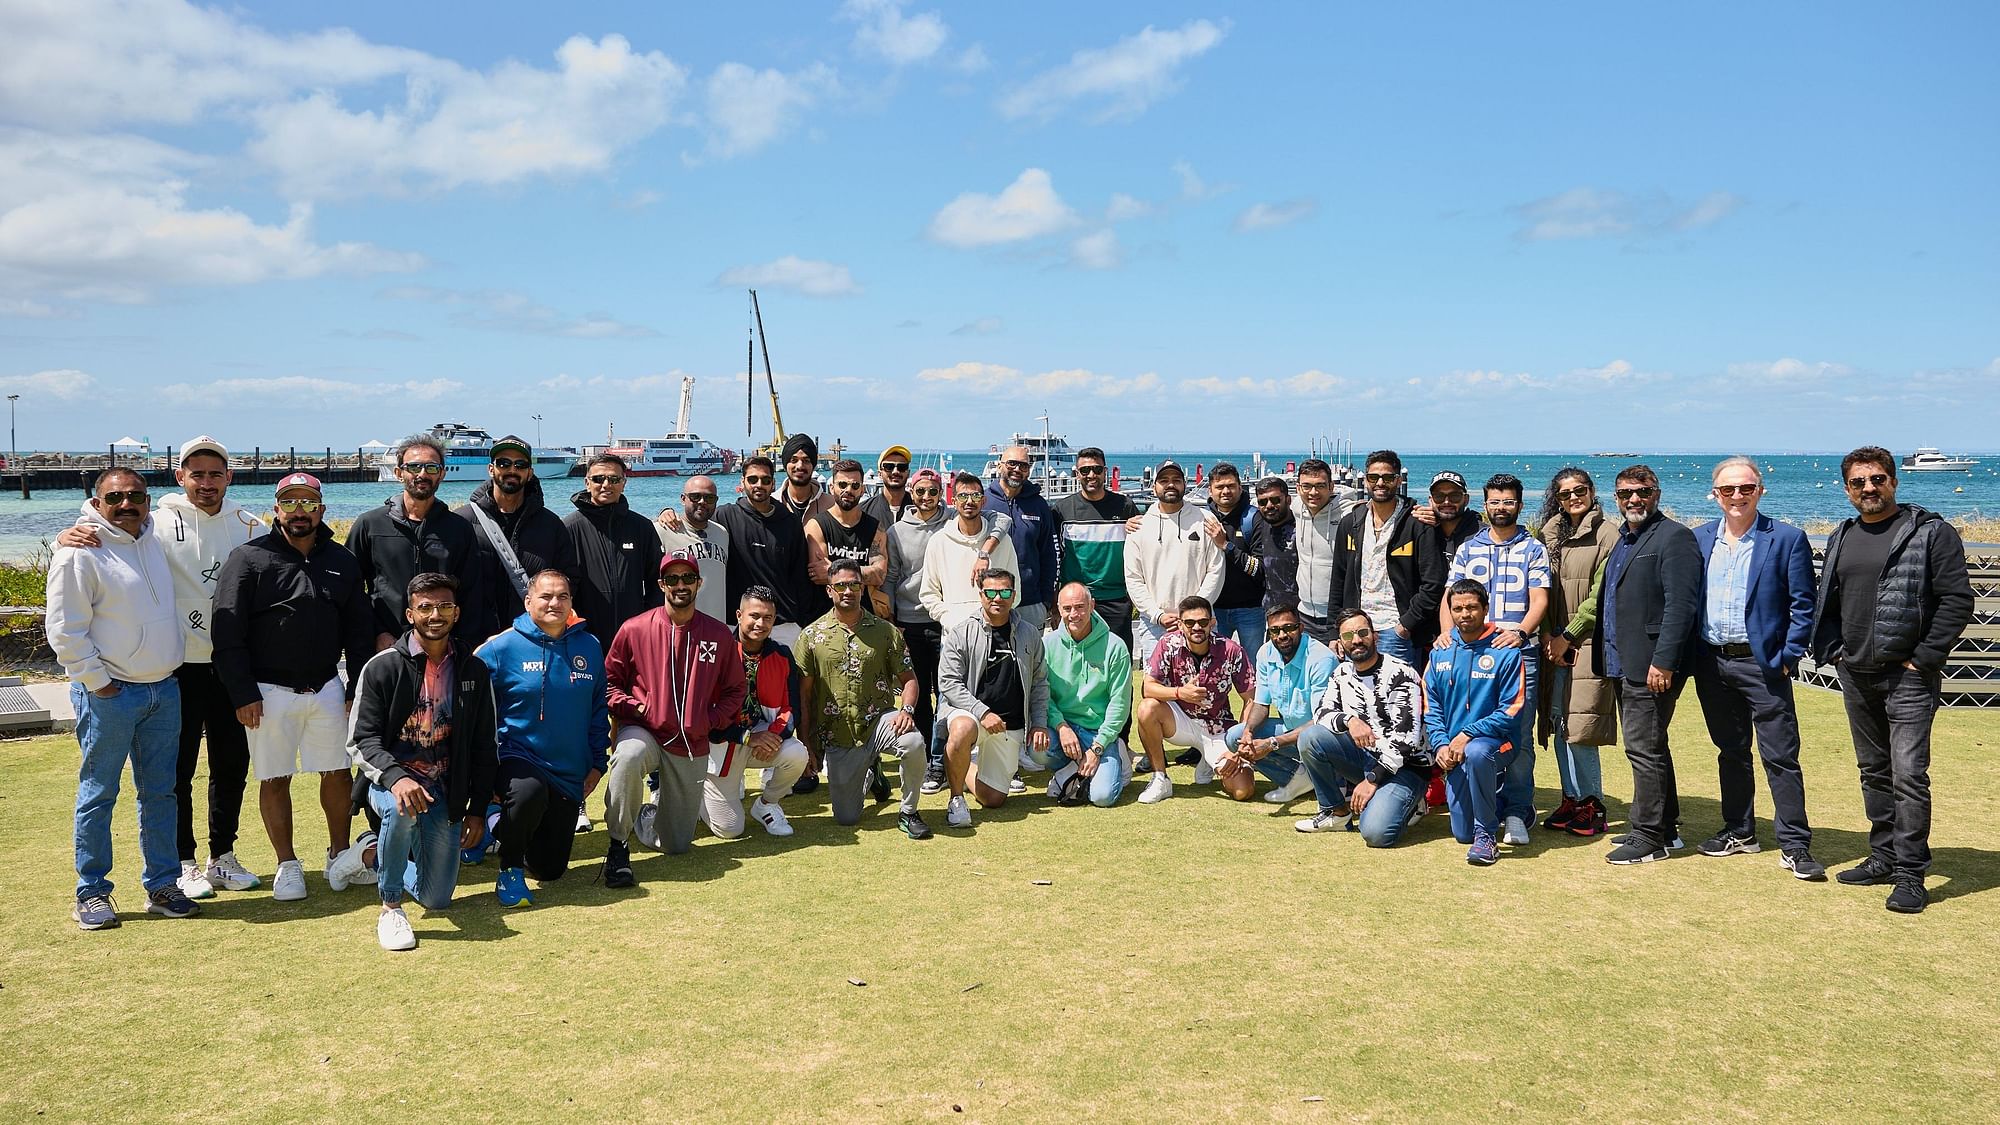 <div class="paragraphs"><p>The Indian team had a fun day out at Rottnest Island ahead of their T20 World Cup campaign in Australia on Wednesday.&nbsp;</p></div>